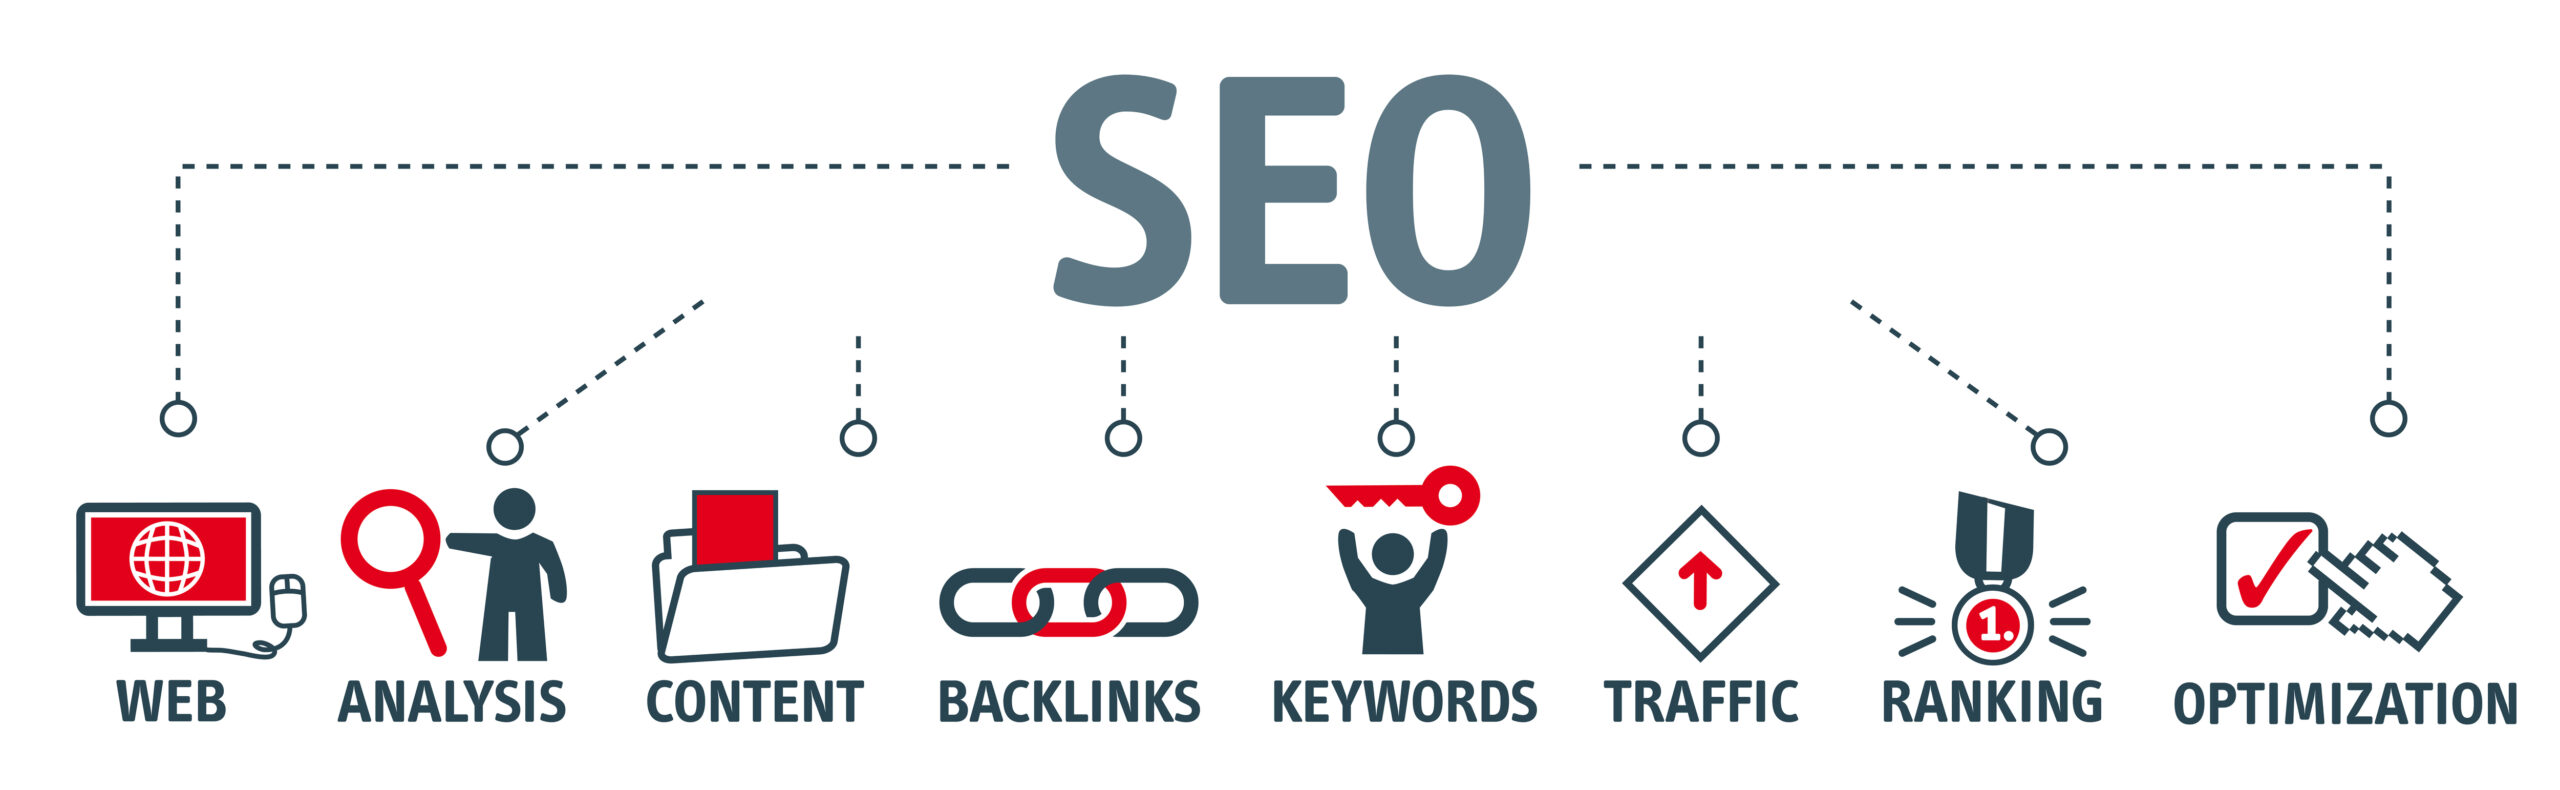 Search Engine Optimisation SEO is one of Marketigation's core marketing services